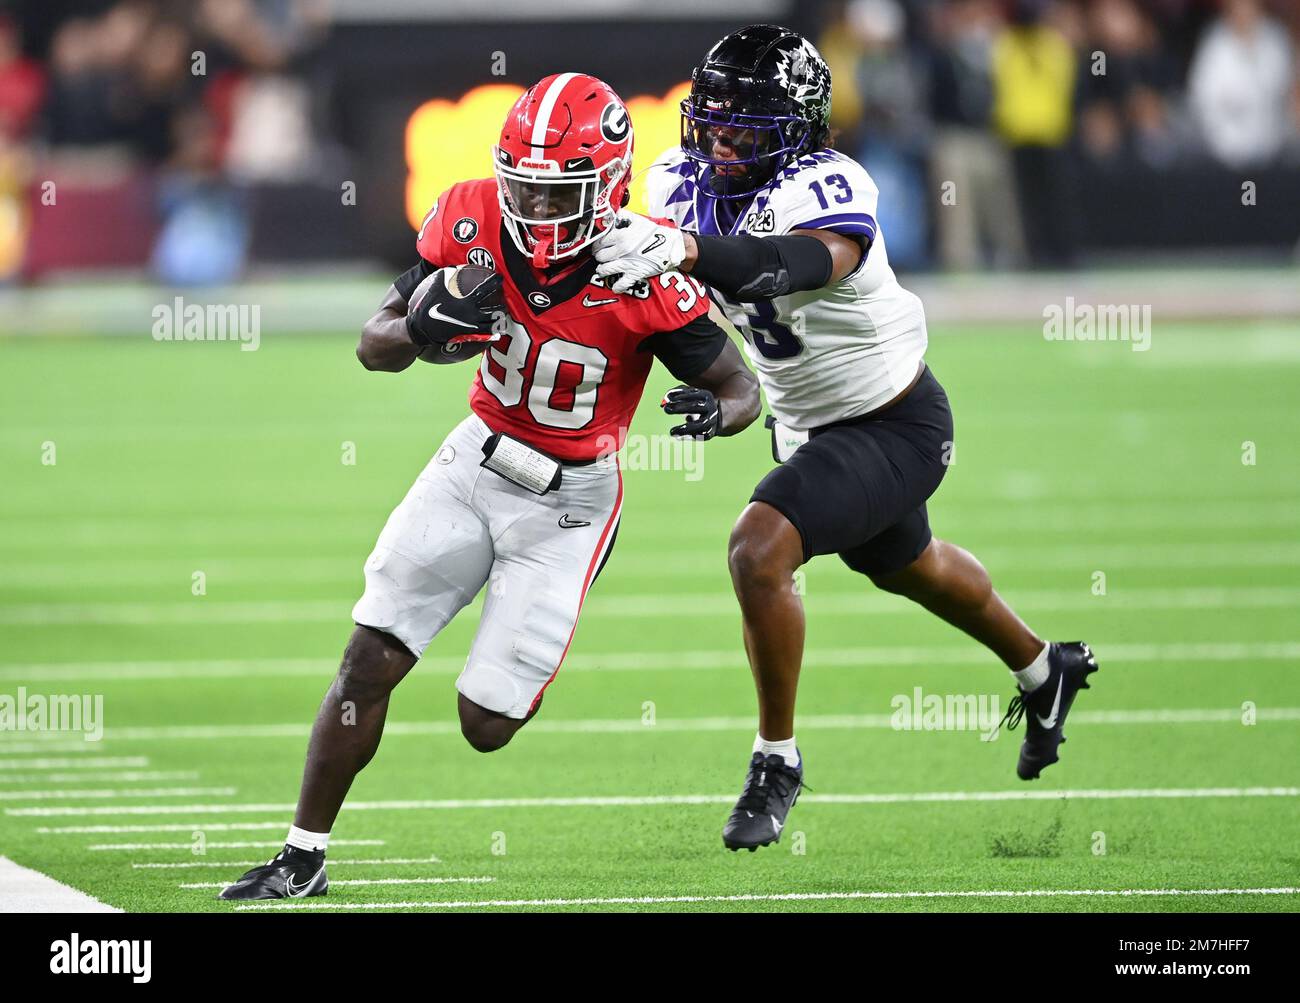 Inglewood, United States. 09th Jan, 2023. Georgia Bulldogs Daijun Edwards carries the football in the second quarter against the TCU Horned Frogs at the 2023 NCAA College Football National Championship between Georgia and TCU at SoFi Stadium in Inglewood, California, on Monday, January 9, 2023. Photo by Mike Goulding/UPI Credit: UPI/Alamy Live News Stock Photo